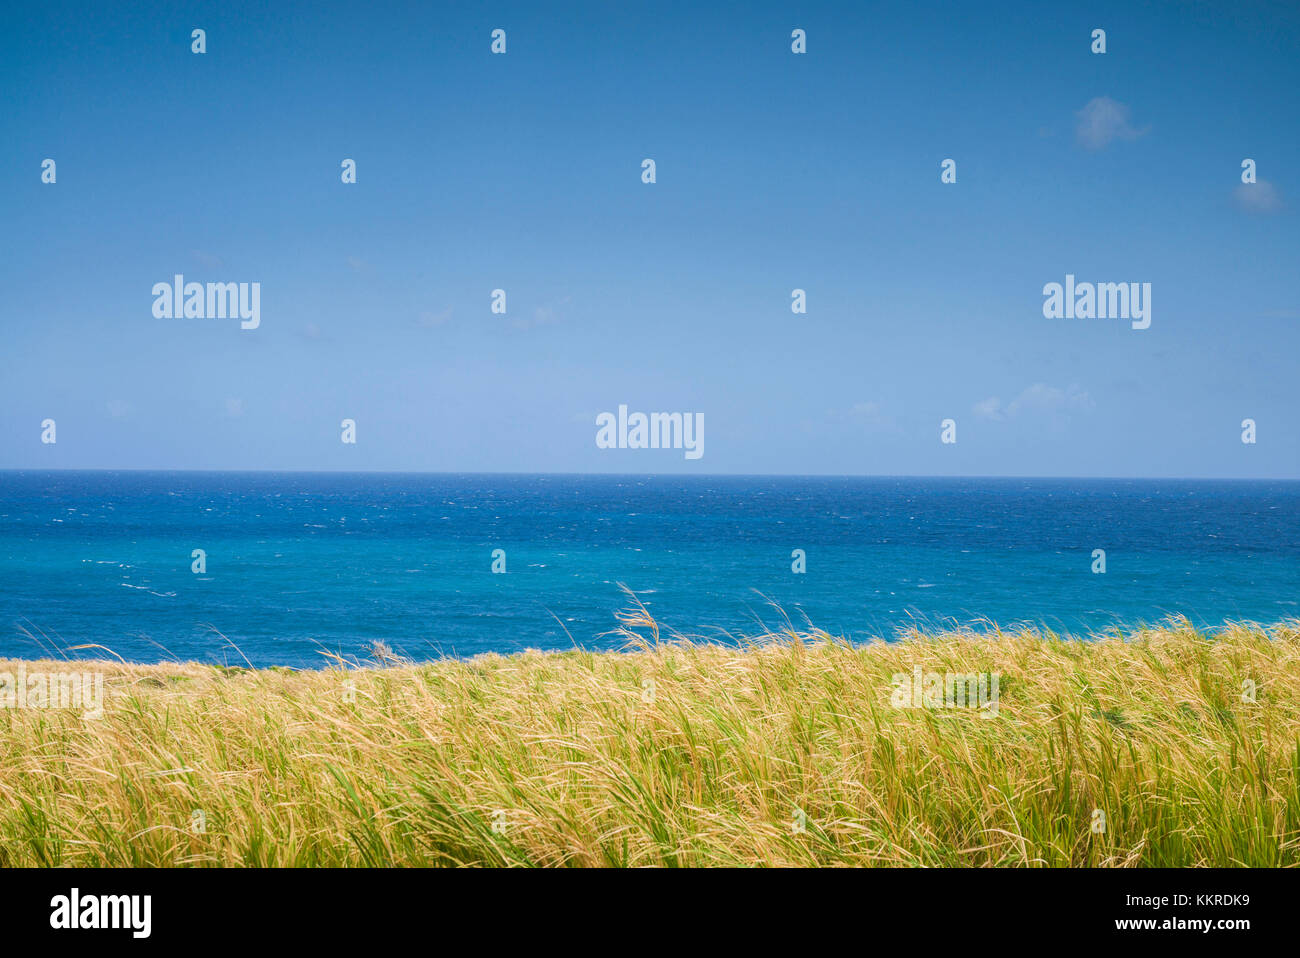 St. Kitts and Nevis, St. Kitts, Belle Vue, beach view Stock Photo